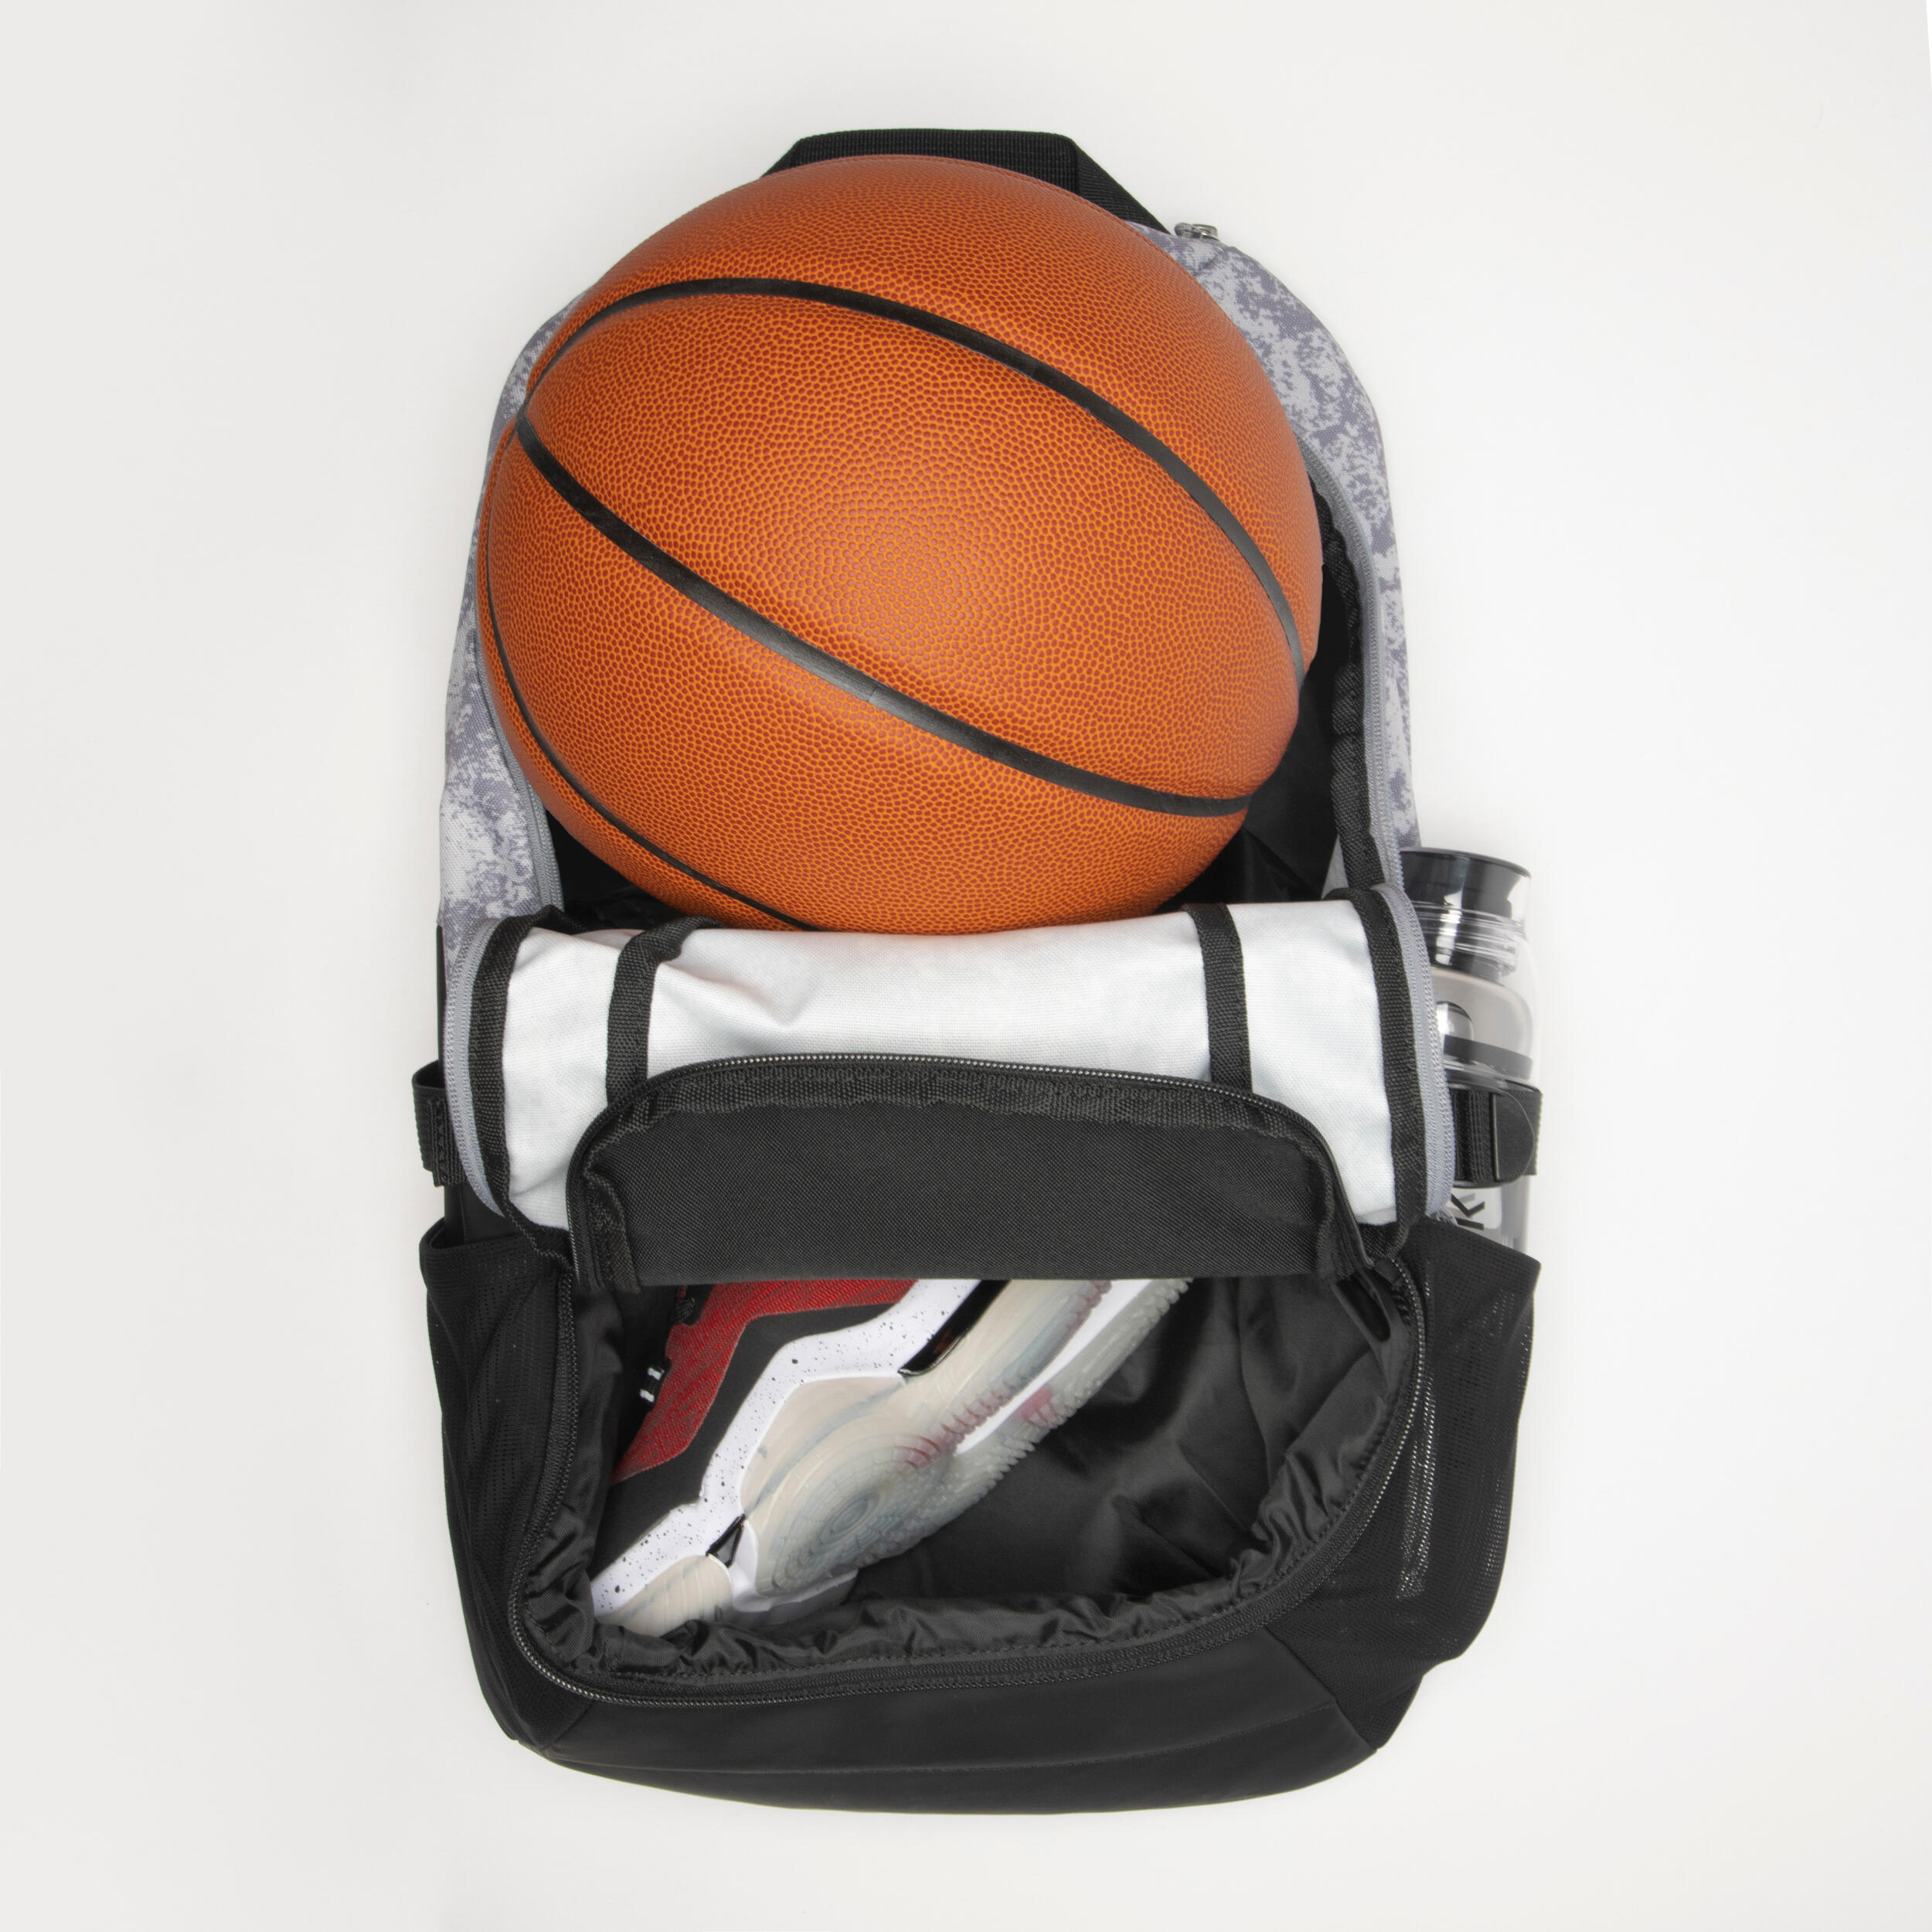 Amazon.com : POINT3 Basketball Backpack Road Trip 2.0, Bag with Drawstring  for Soccer, Volleyball & More, Compartments for Shoes, Water, & Clothes,  Water Resistant Equipment Bag, Unisex Sports Backpack - Black :